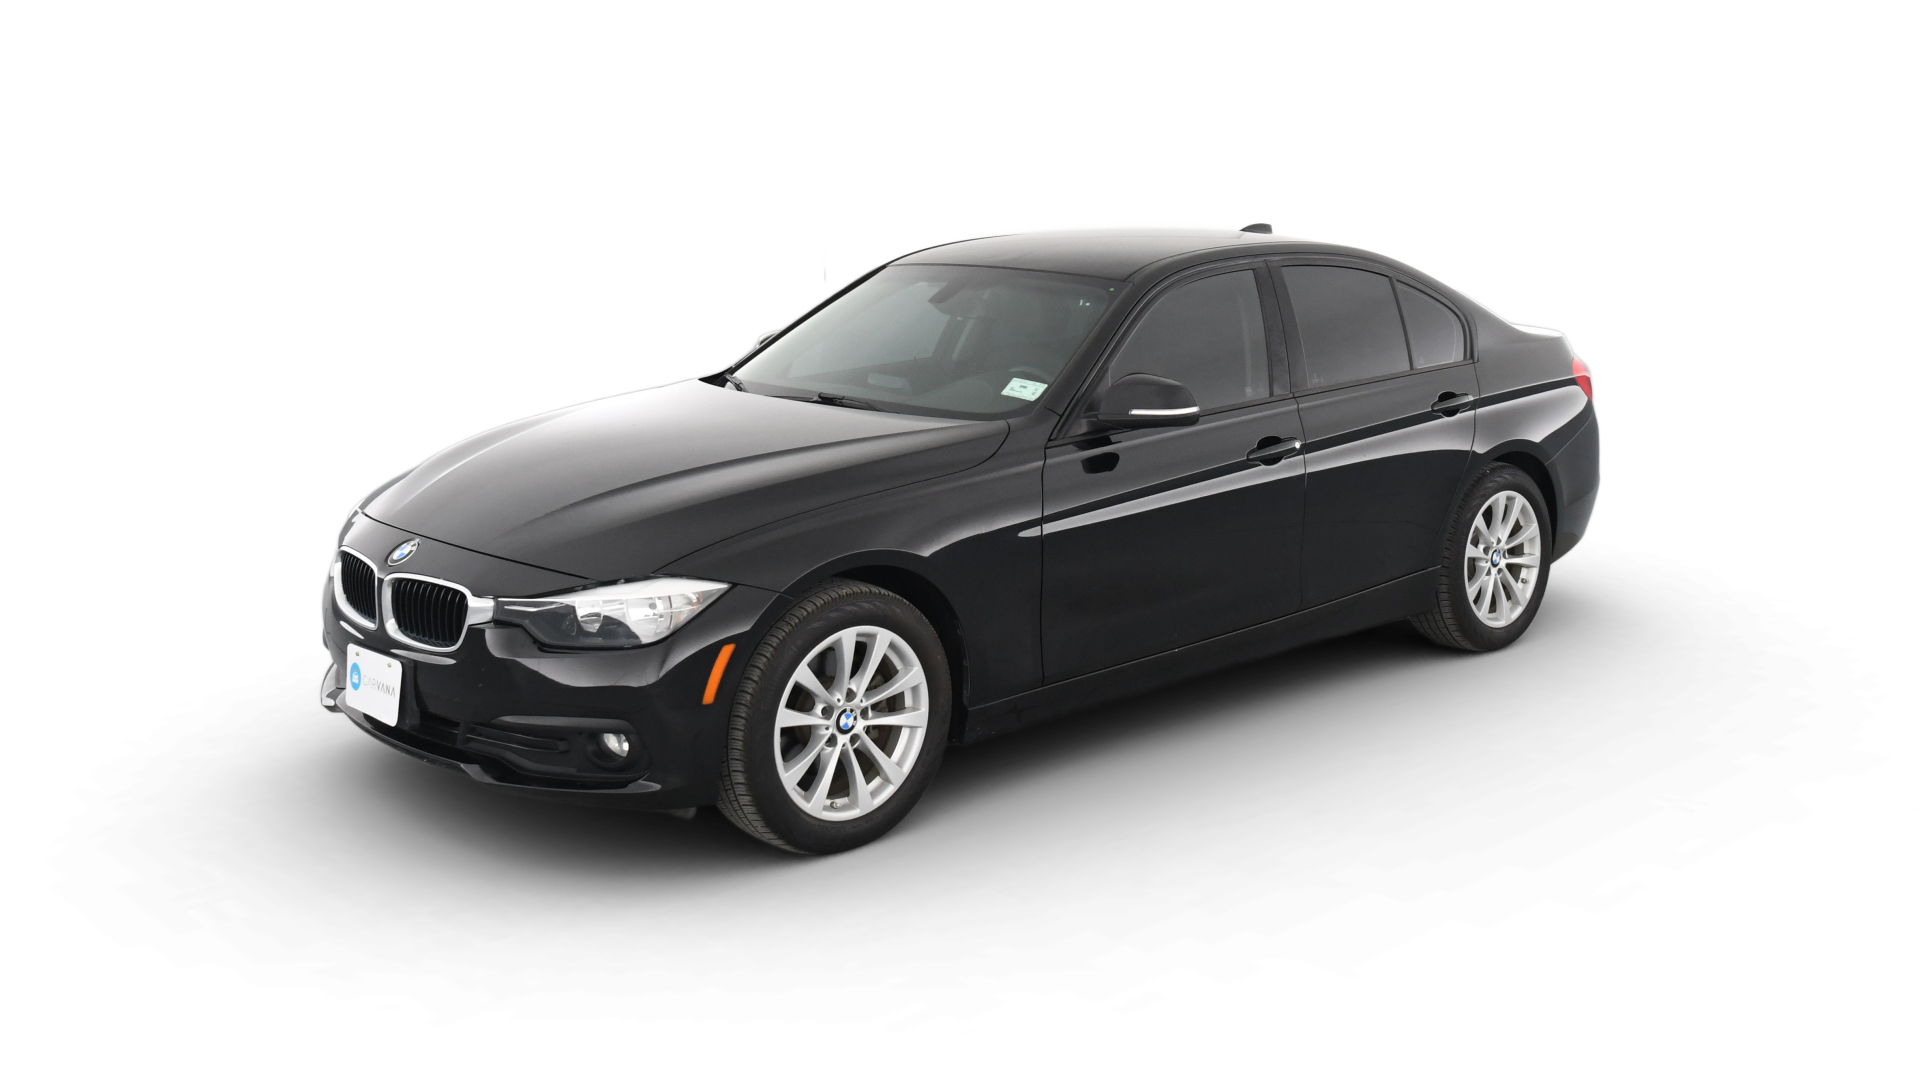 Used 2016 BMW 3 Series For Sale Online | Carvana